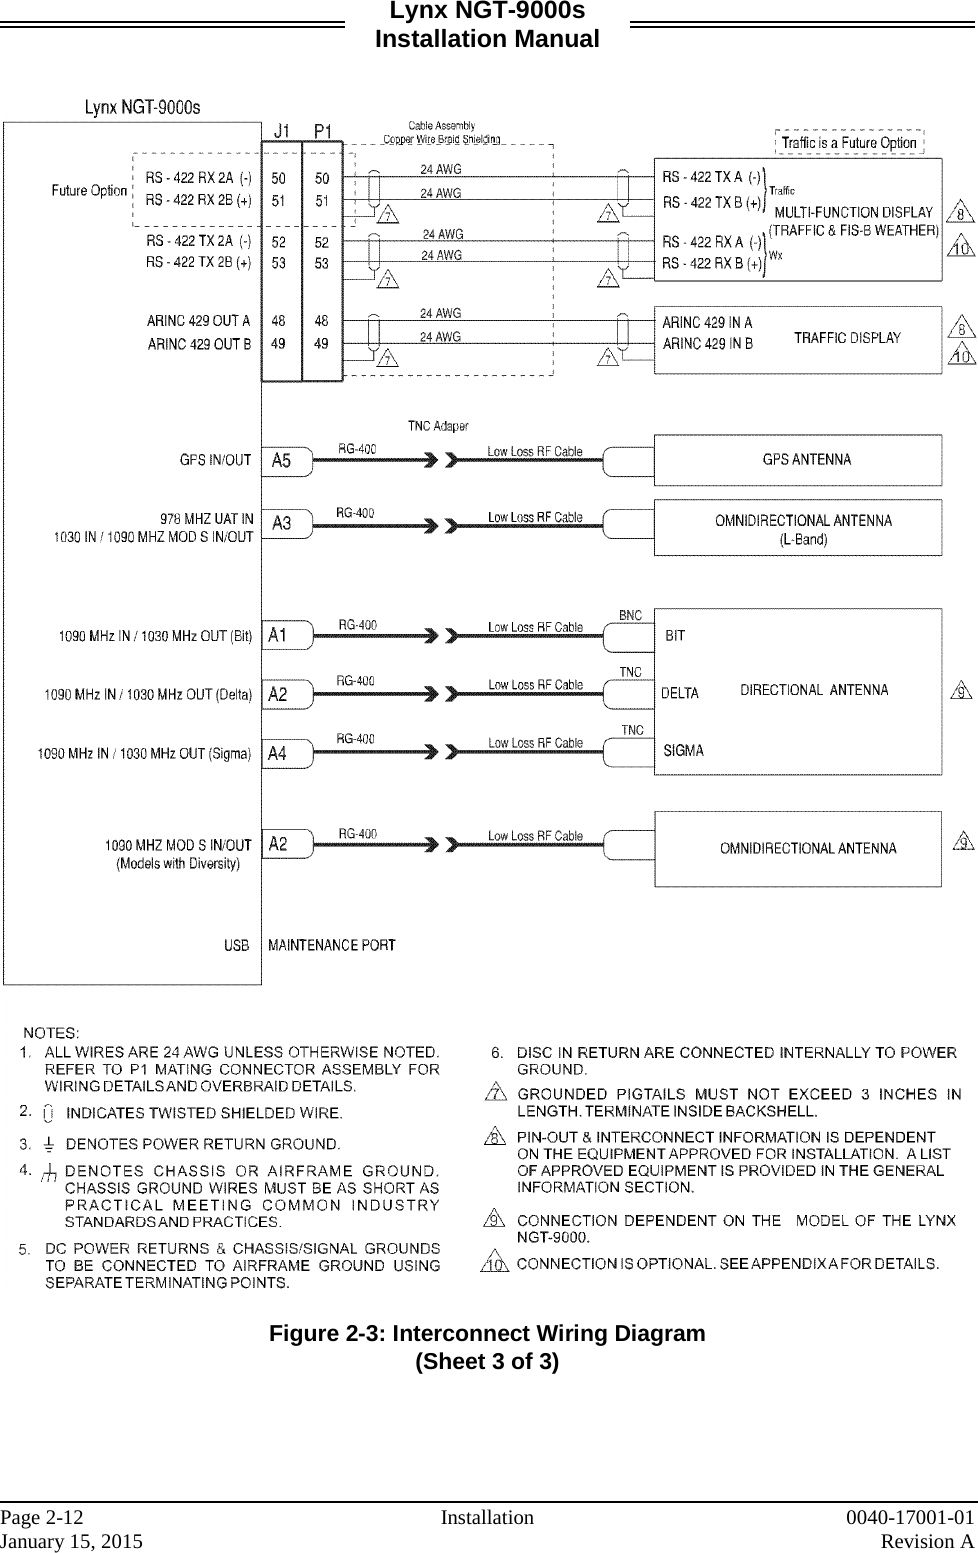 Lynx NGT-9000s Installation Manual     Figure 2-3: Interconnect Wiring Diagram (Sheet 3 of 3)    Page 2-12 Installation 0040-17001-01 January 15, 2015    Revision A  